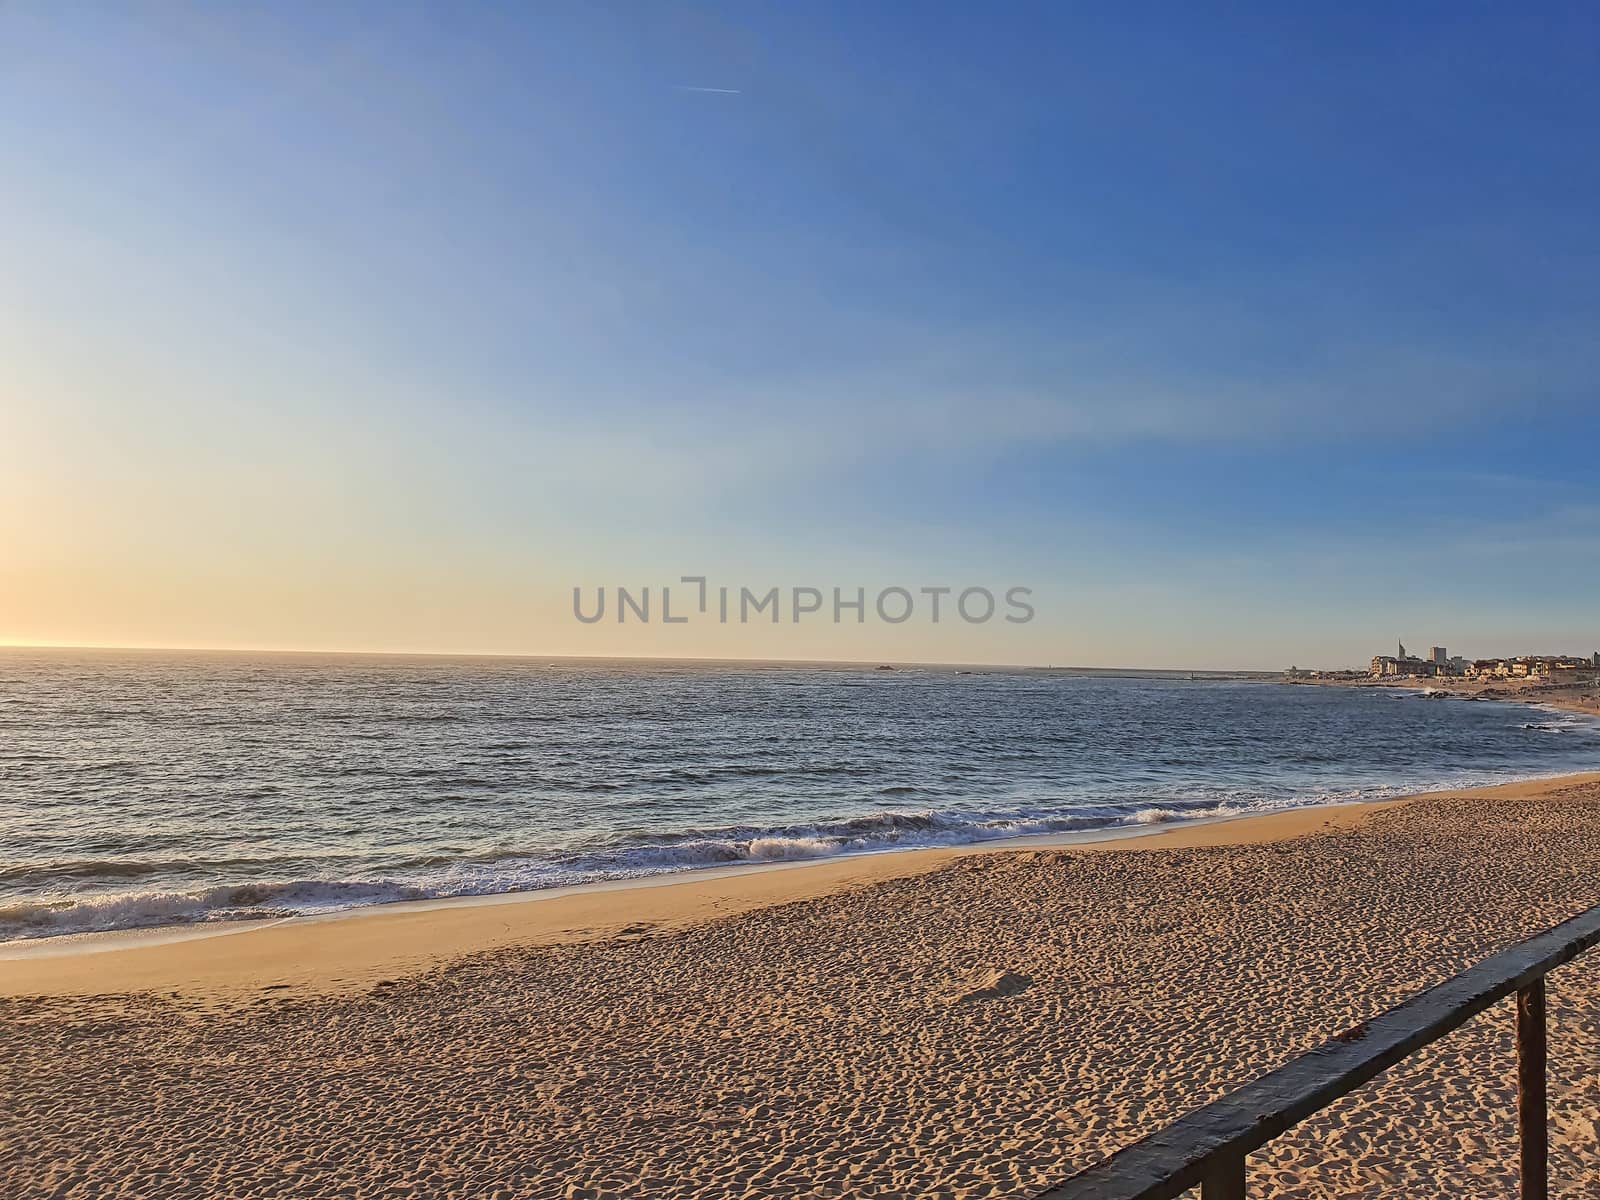 Early morning beach at Vila do Conde, touristic beach in Portugal